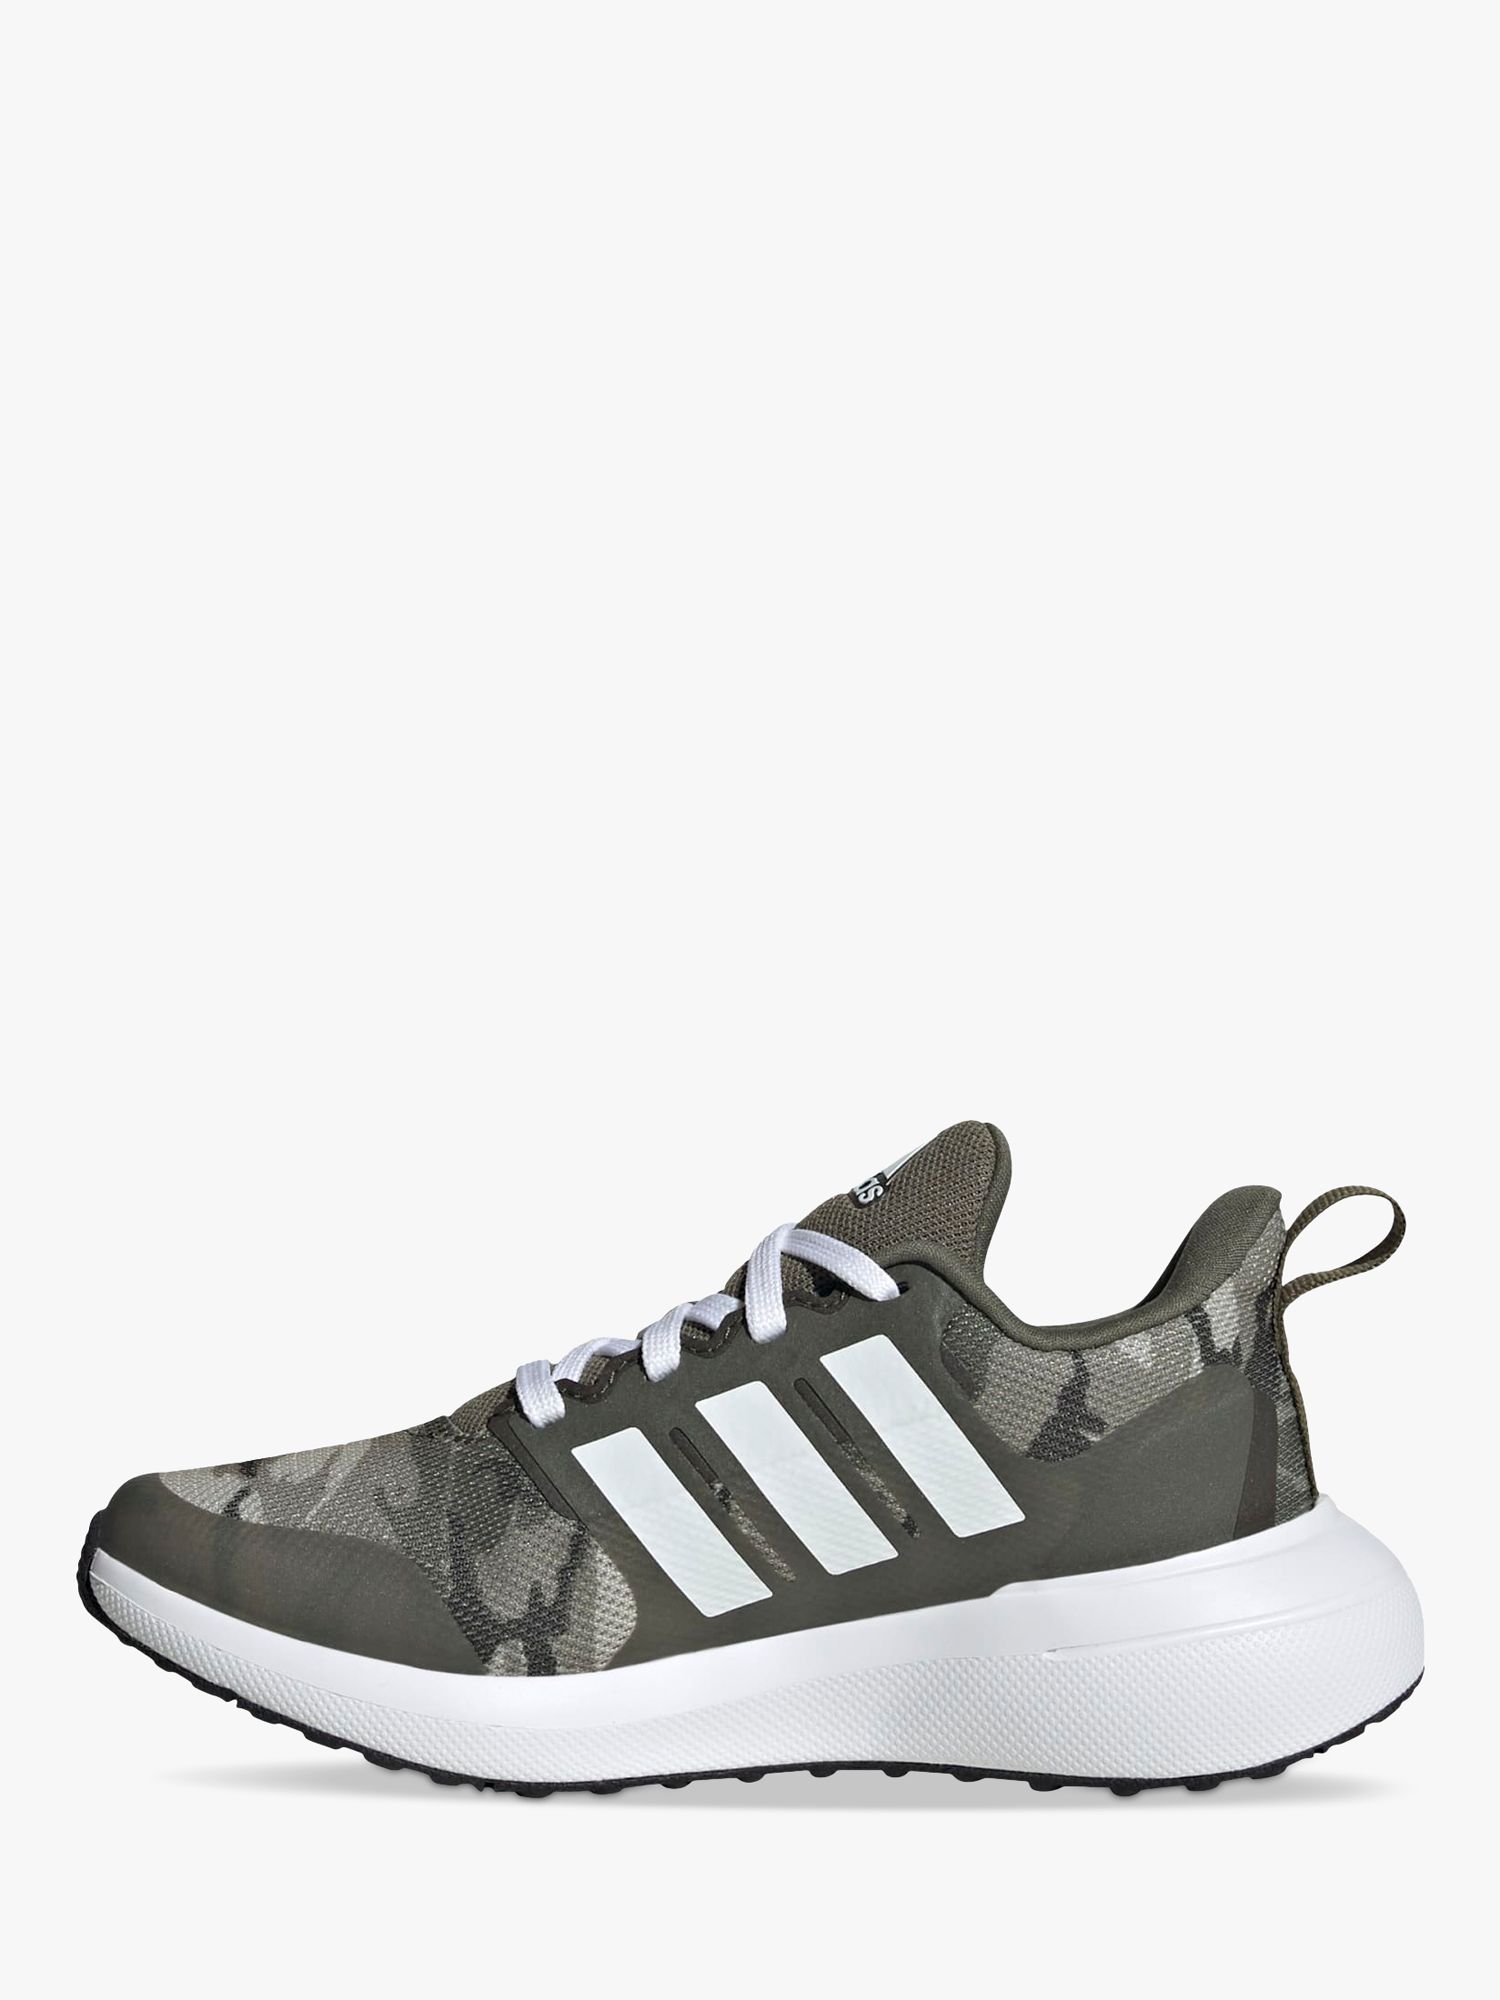 adidas Kids' Fortarun 2.0 Lace Up Camouflage Trainers, Olive/White, 5